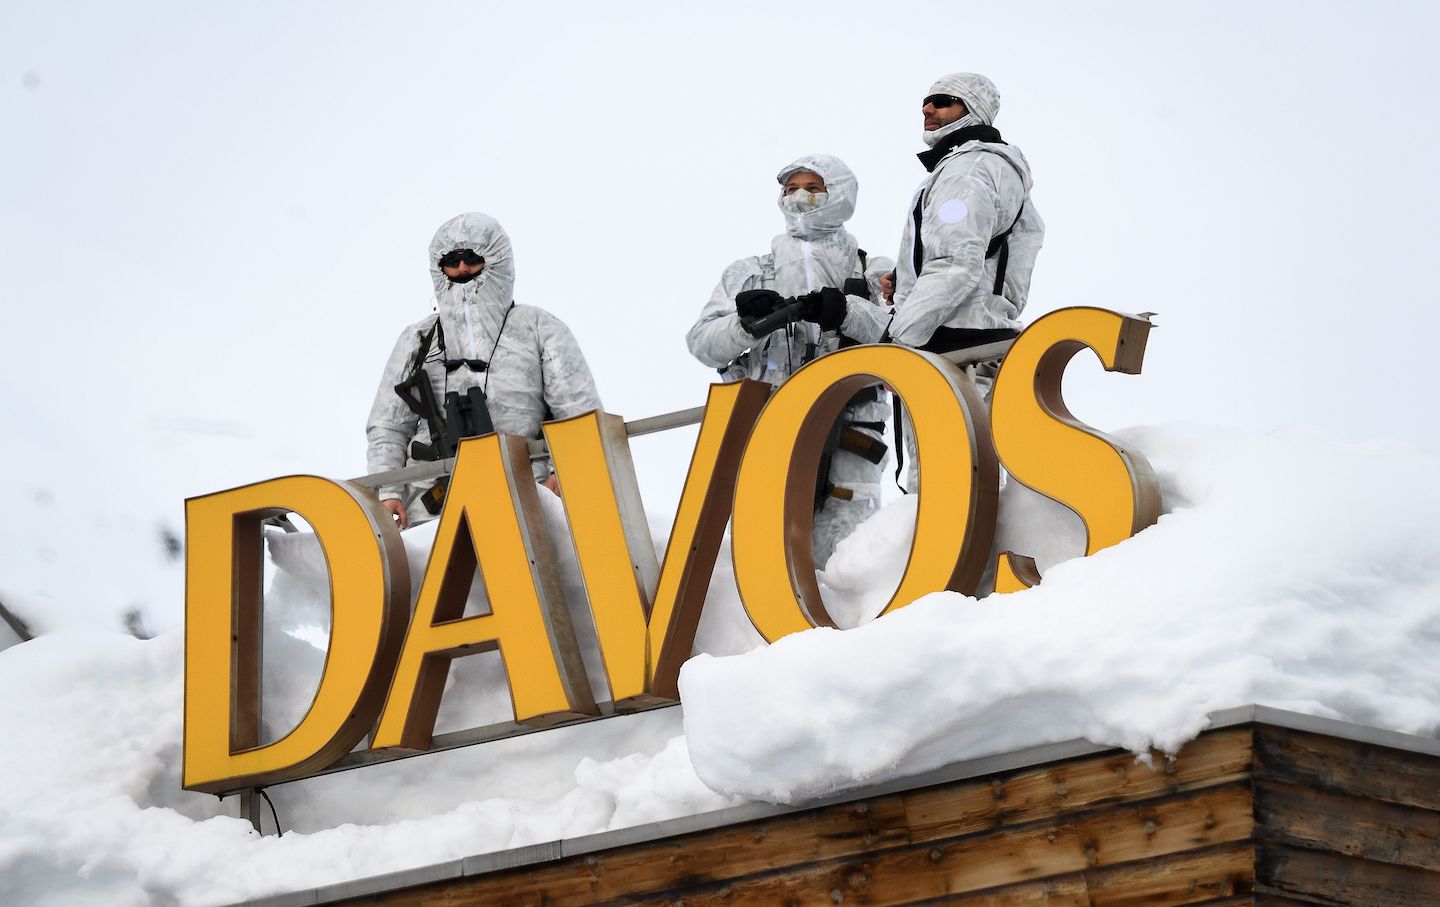 What Do We Do About the Davos Class?